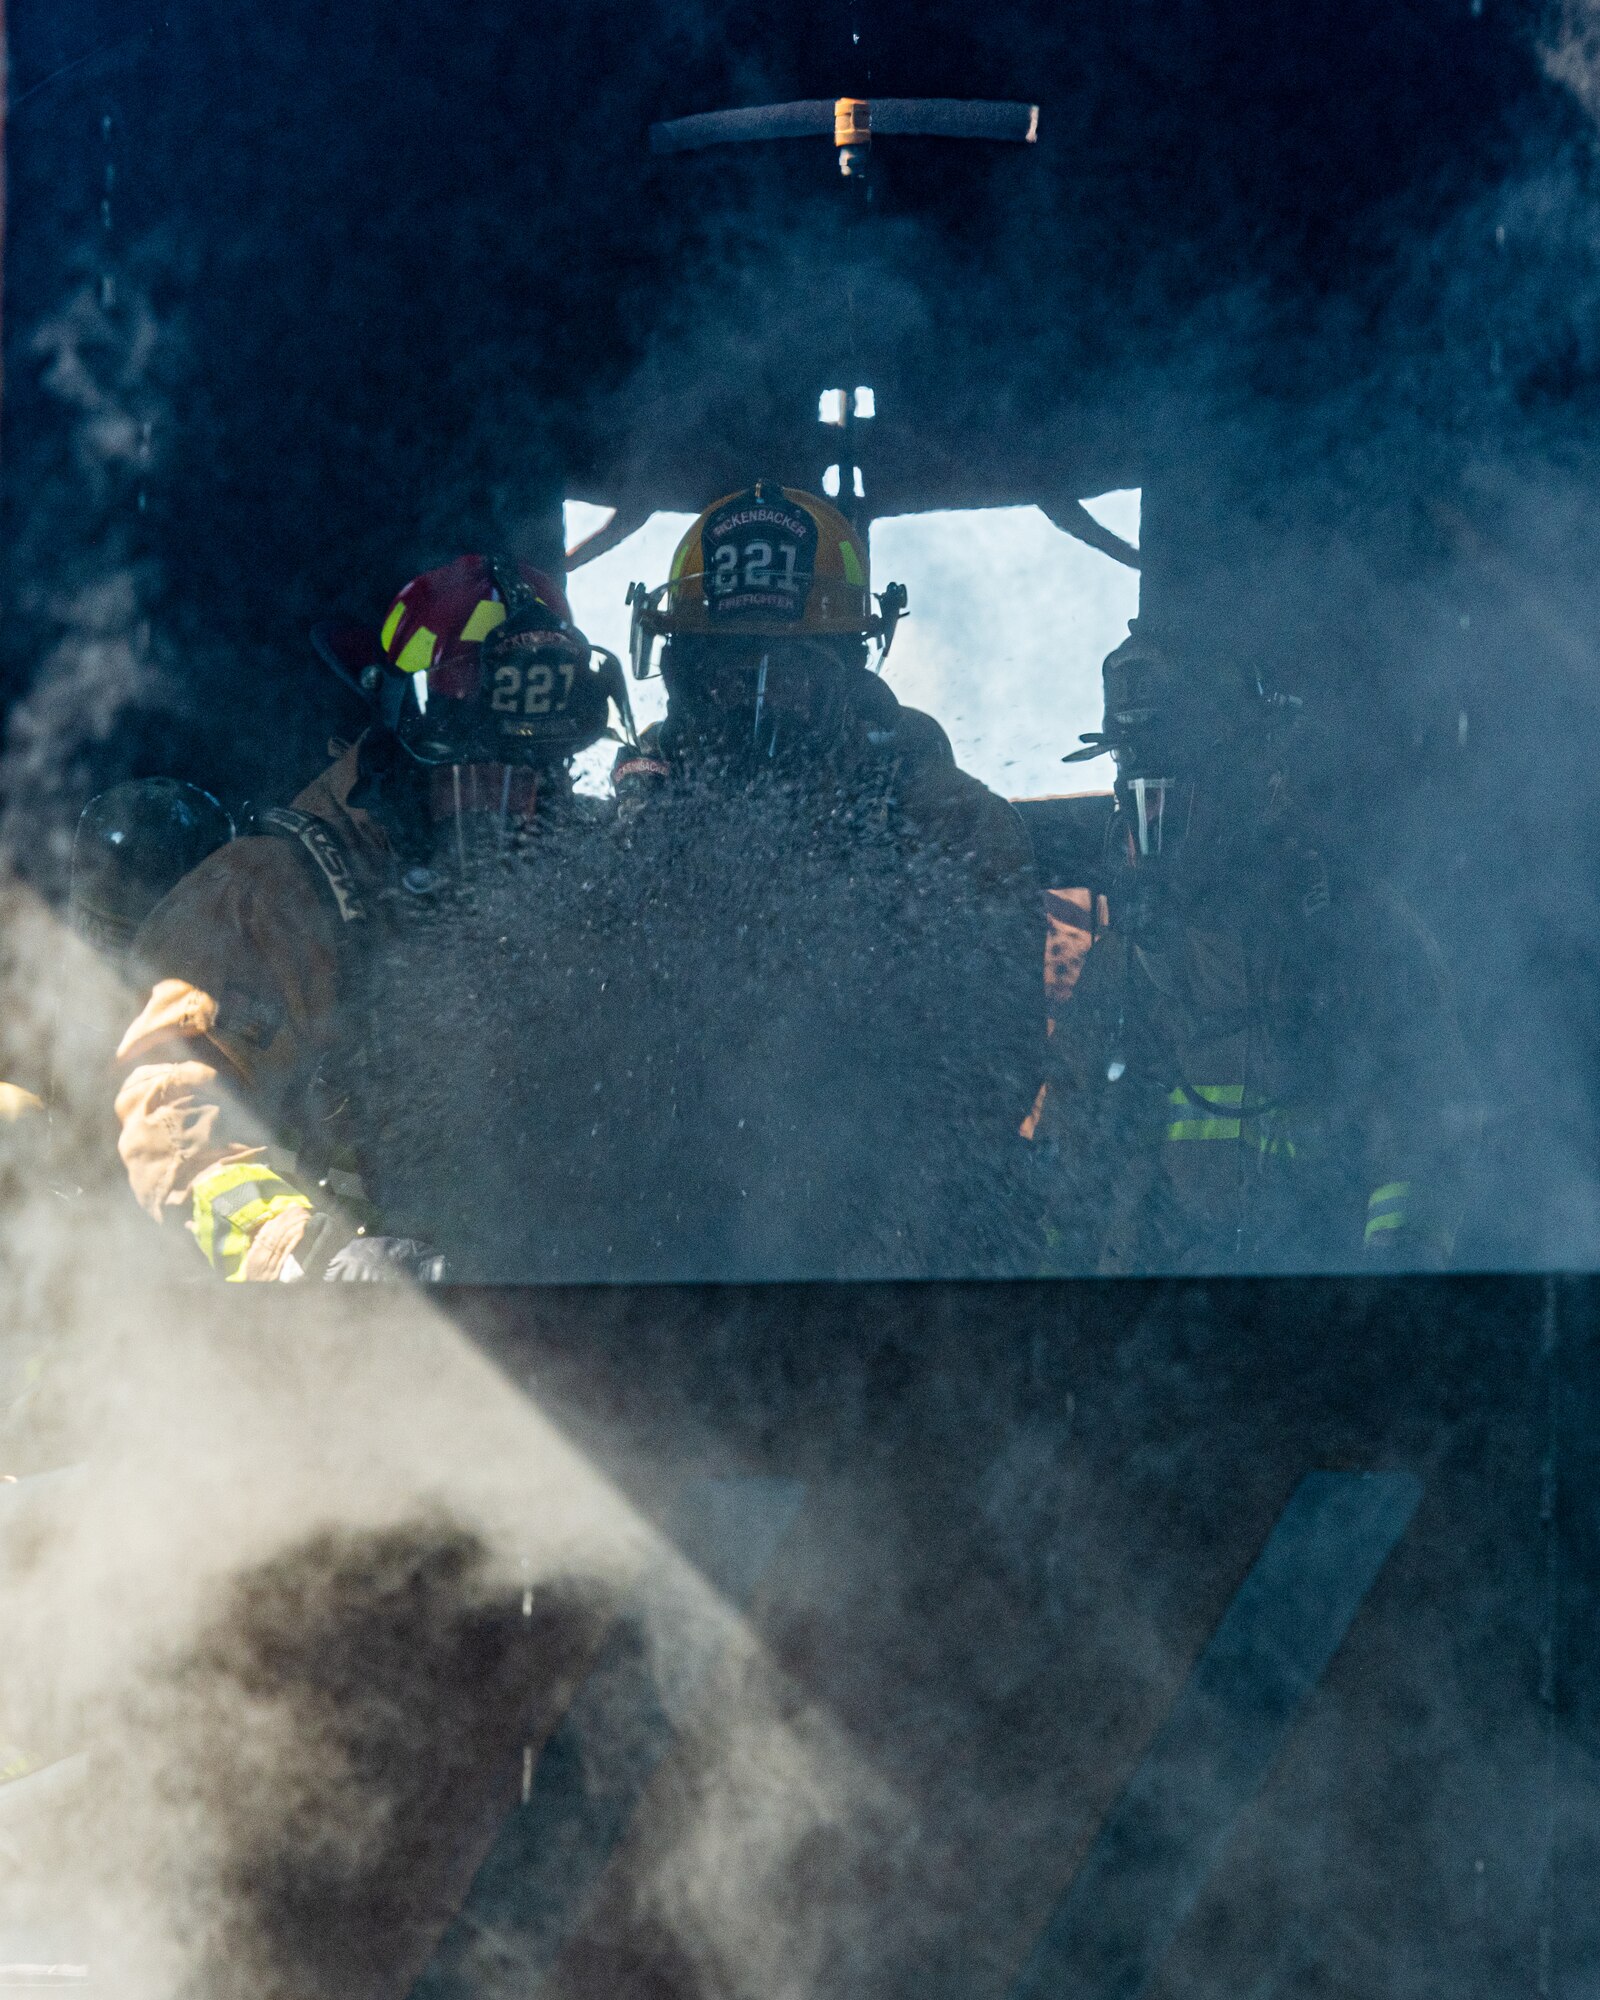 Firefighters from Rickenbacker Air National Guard extinguish an internal aircraft fire, Sept. 9, 2020, at Youngstown Air Reserve Station’s burn pit. About 40 Citizen Airmen from RANG’s fire department came to the 910th Airlift Wing, Sept. 8-10, to do their annual live-fire training.